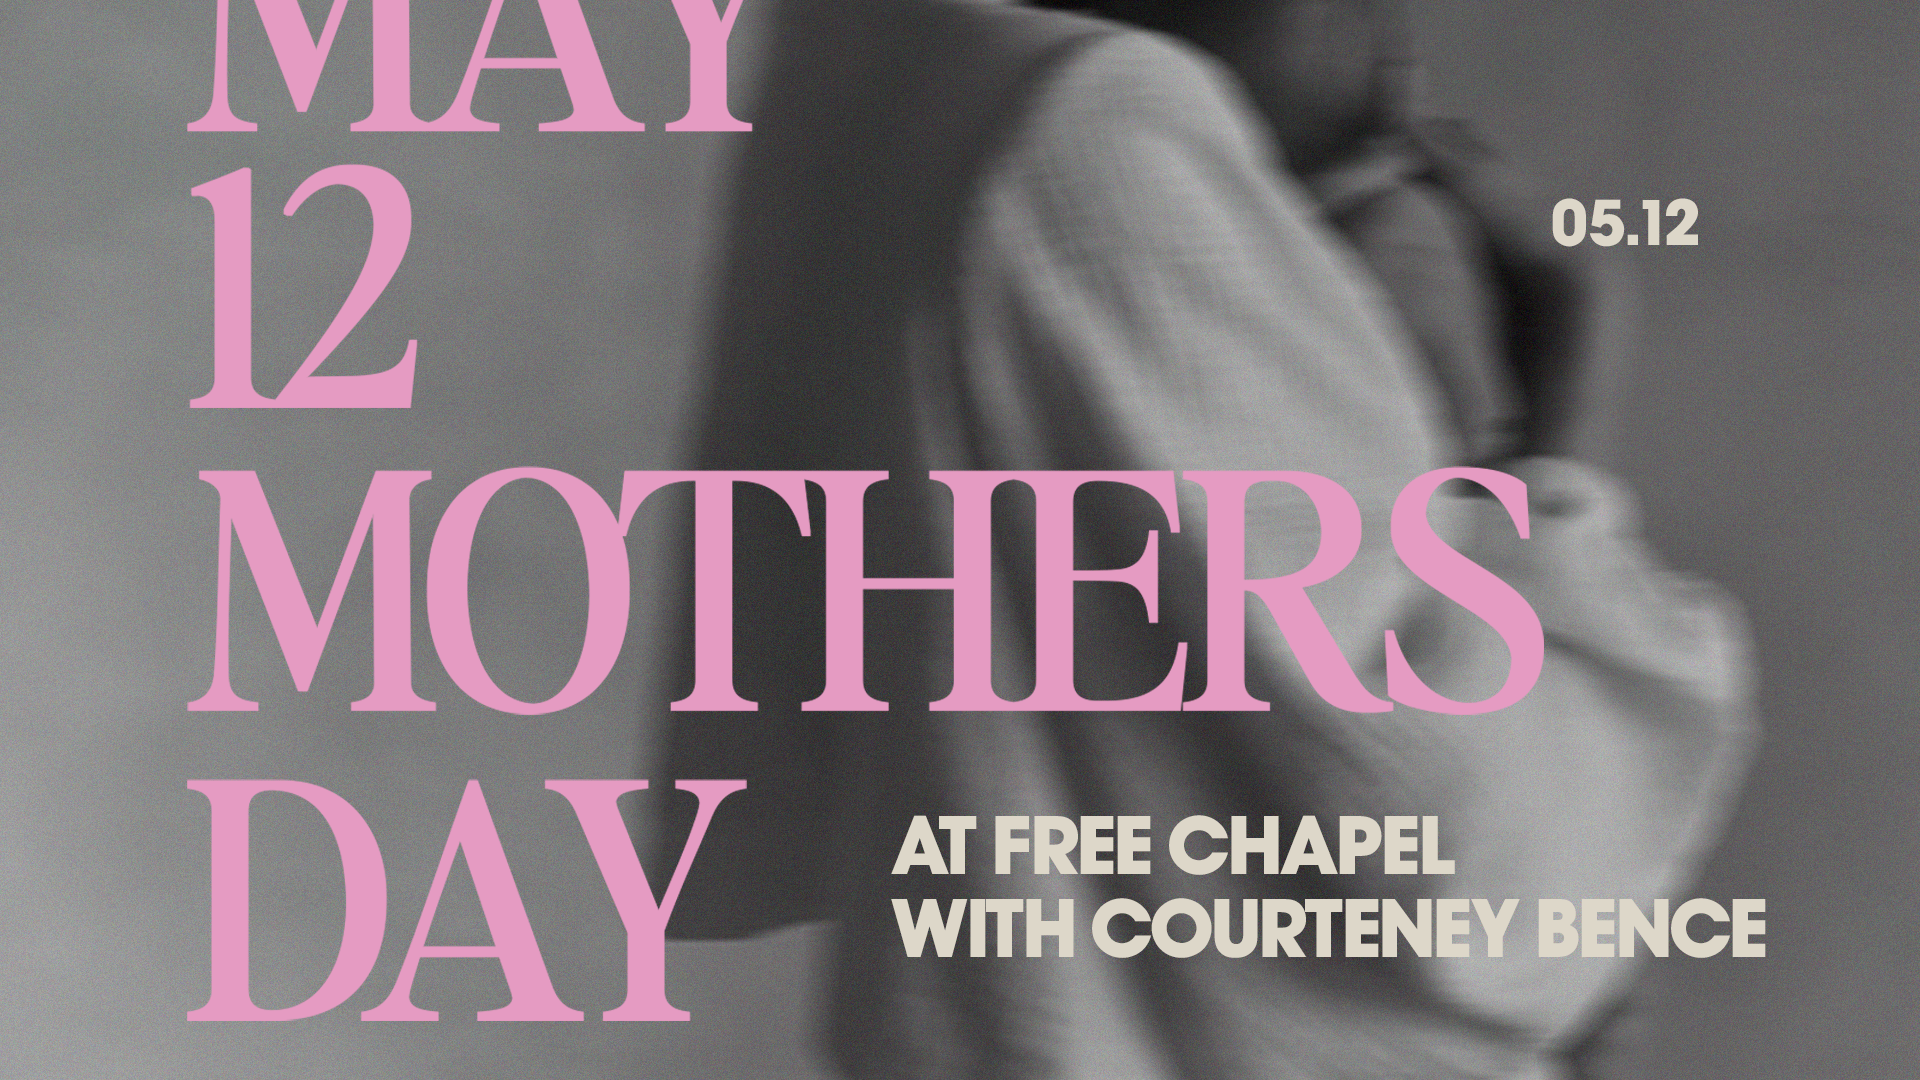 Mothers Day at Free Chapel  at the Midtown campus